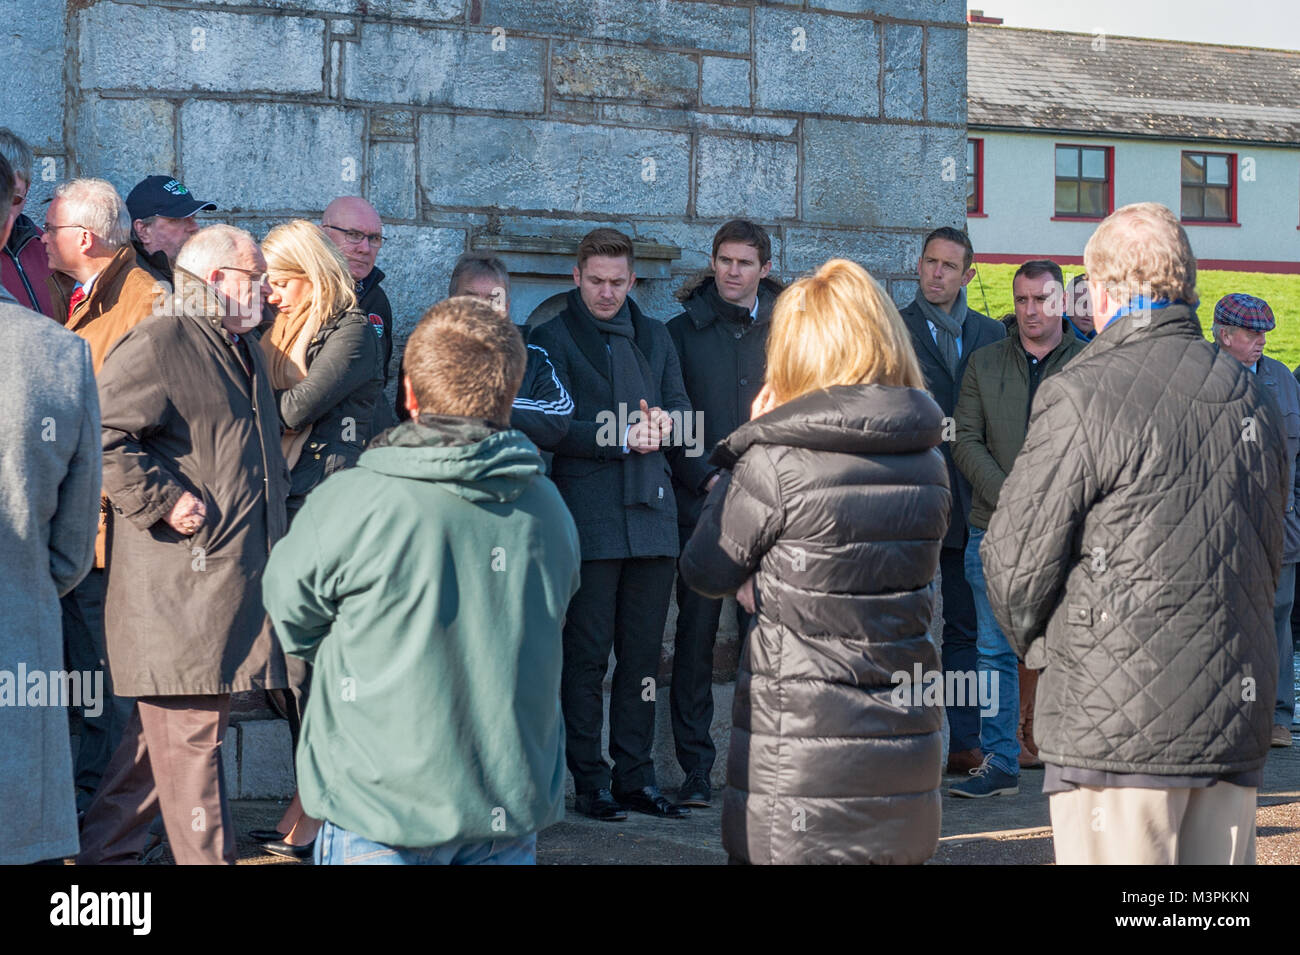 Ovens, Ireland. 12th Feb, 2018. The funeral of footballer Liam Miller took place today at St. John the Baptist Church, Ovens, County Cork, Ireland. A huge number of mourners attended the funeral, including many footballers from Miller's old clubs, including Cork City, Celtic and Manchester United. Pictured are former team mates Kevin Doyle, Kevin Kilbane and Alan Bennett. Credit: Andy Gibson/Alamy Live News. Stock Photo